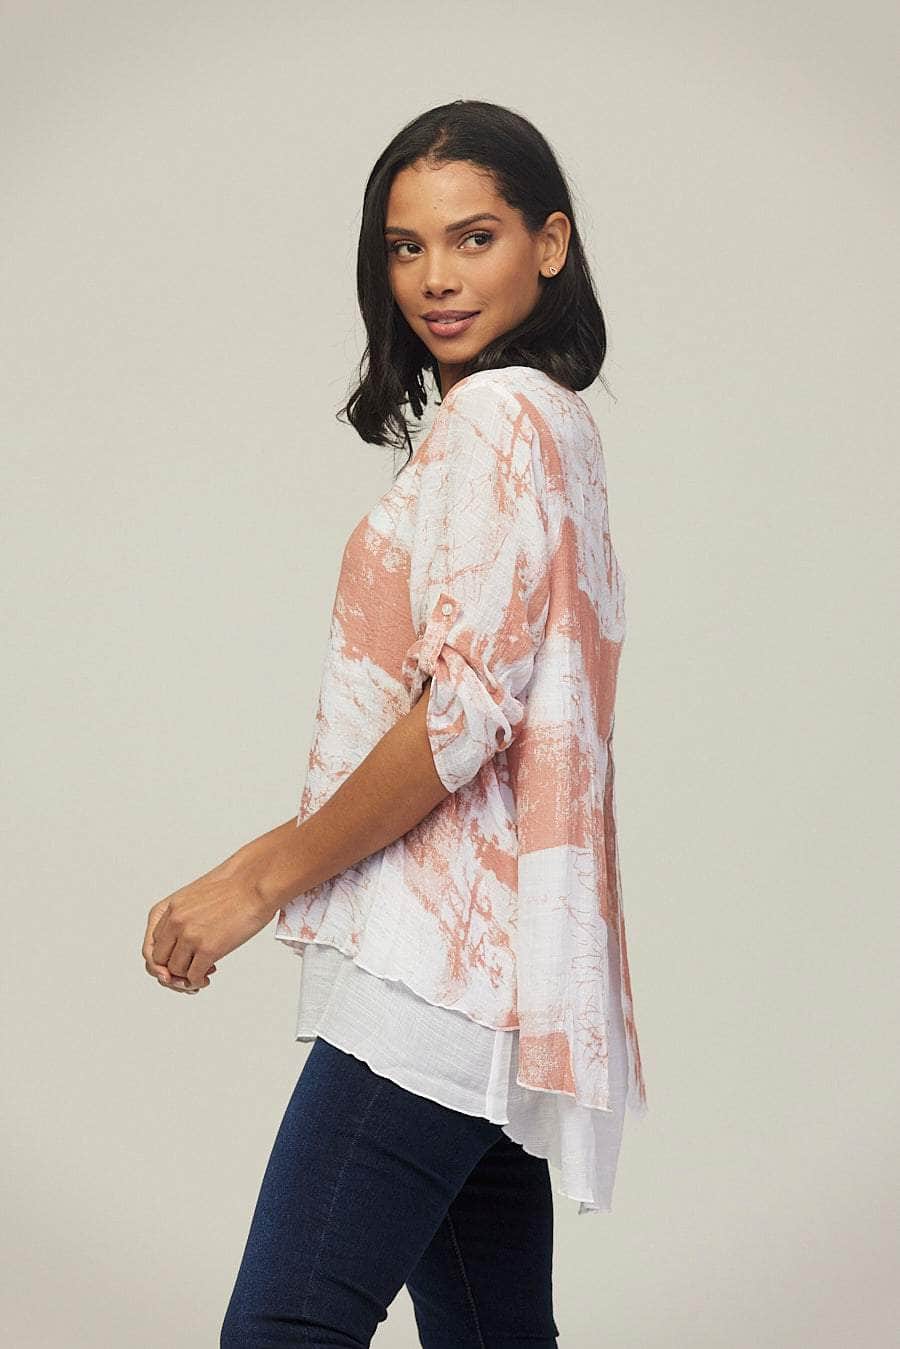 Saloos Top Saloos Lightweight Double Layer Top with Necklace